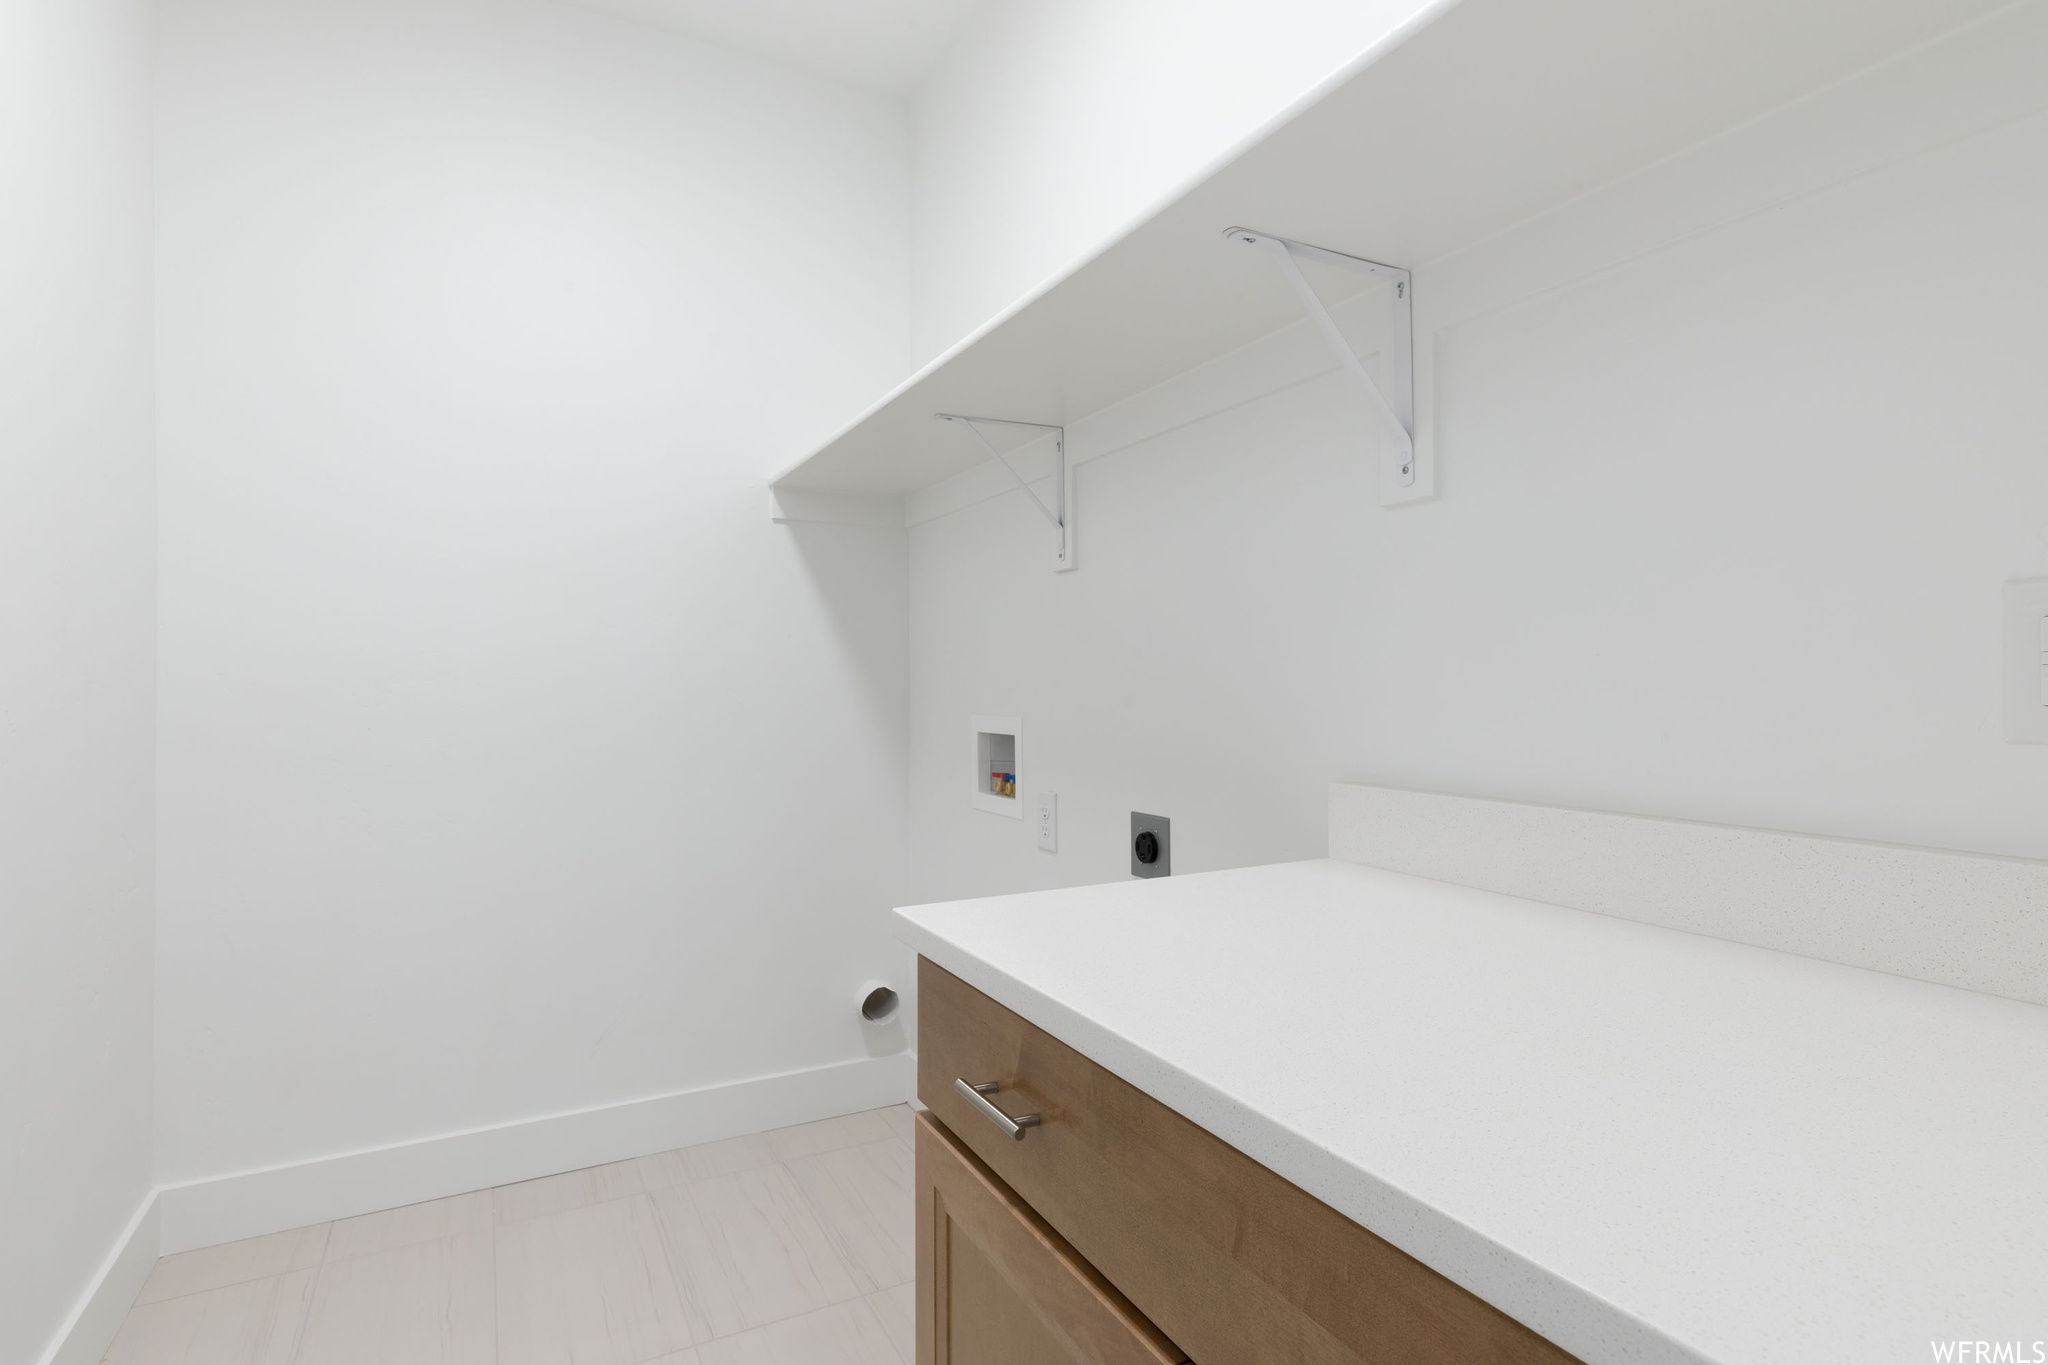 Washroom with light tile floors, hookup for an electric dryer, and washer hookup